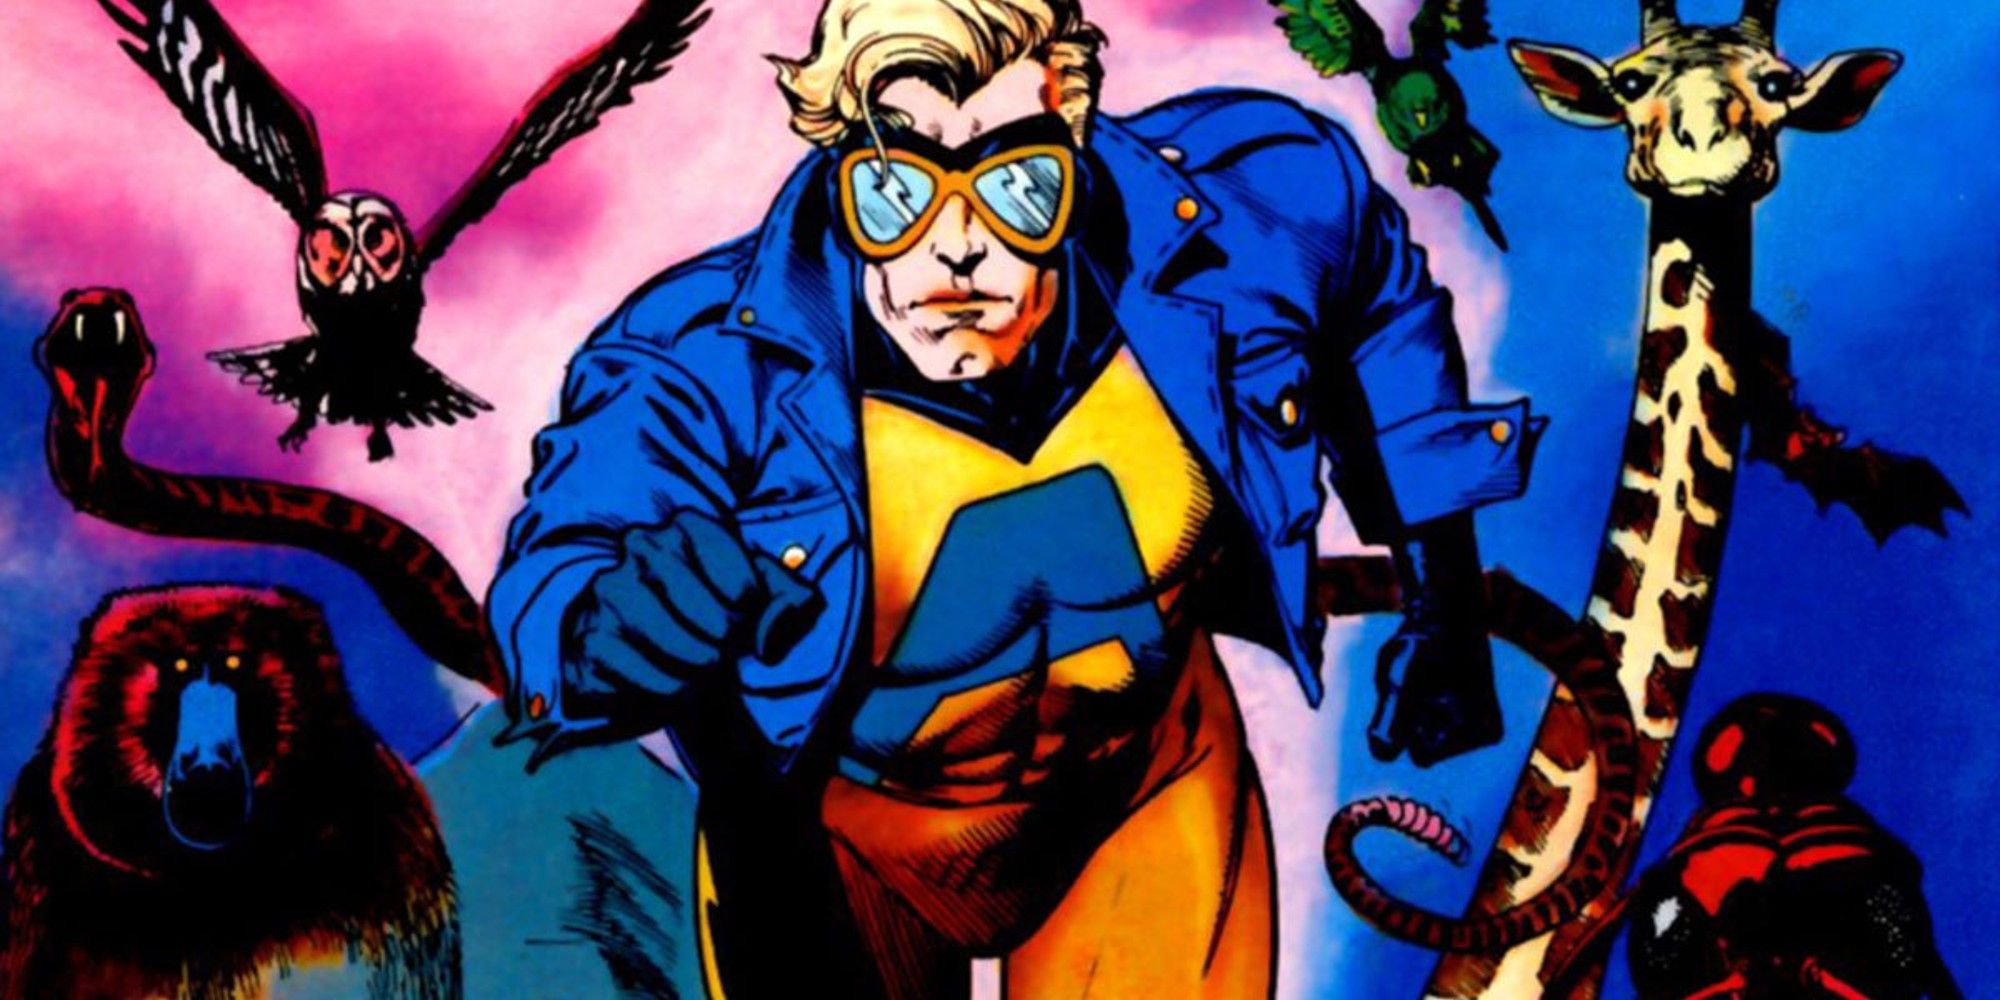 Animal Man in an action pose, with animals following him